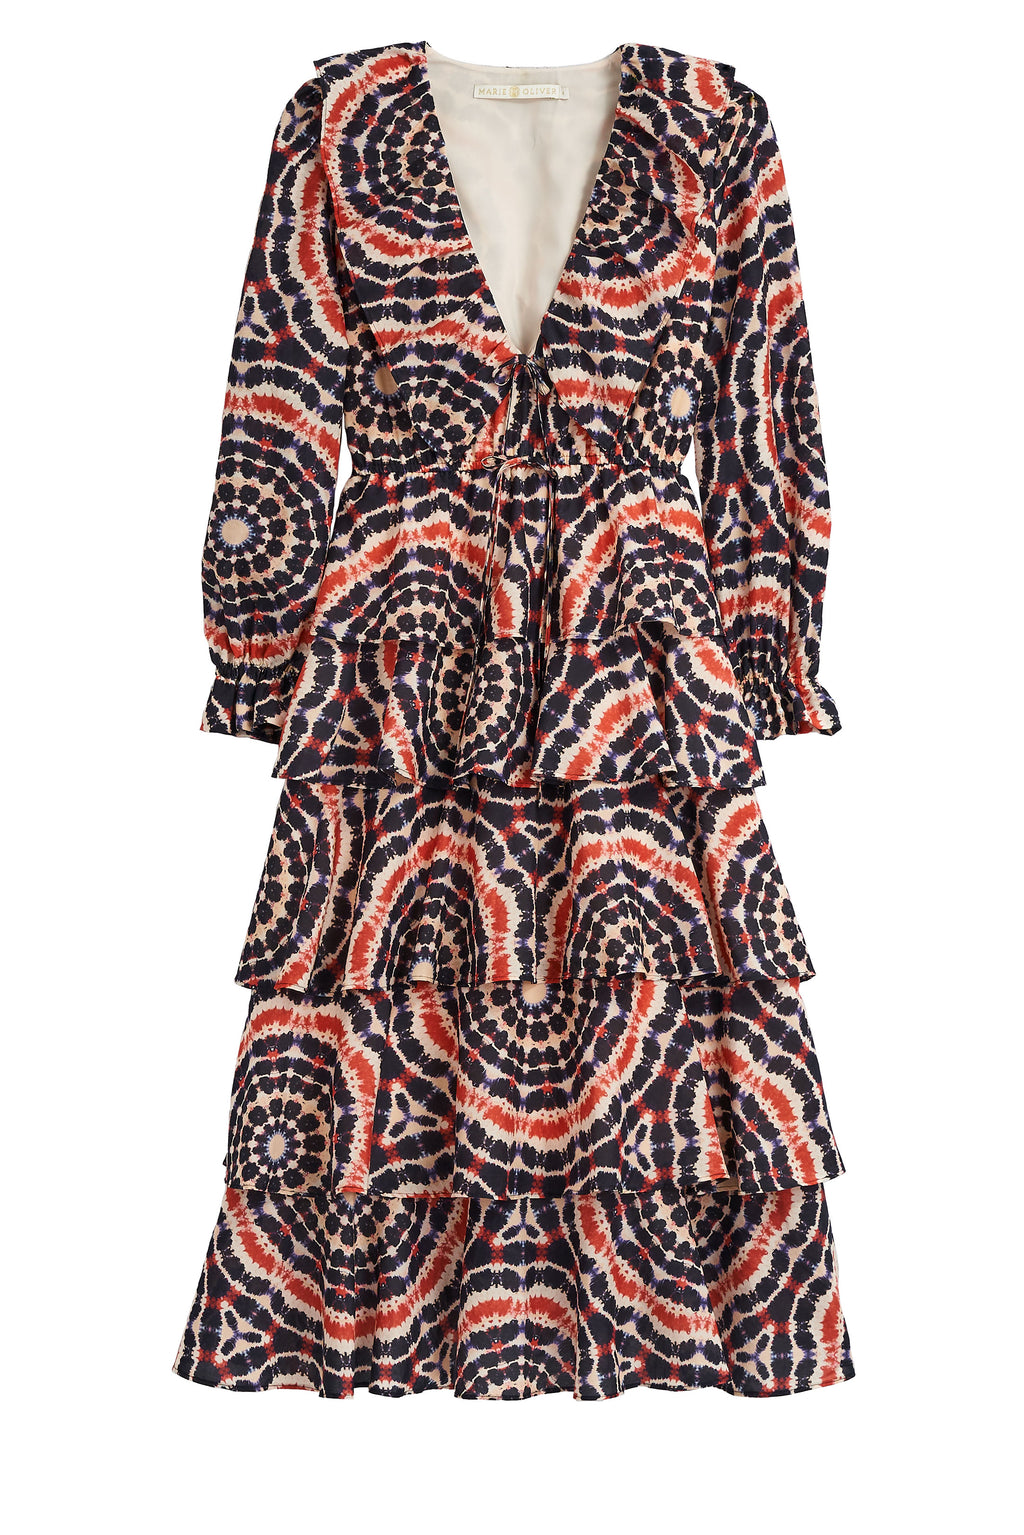 long flowy dress wiith long sleeves and v neckline in a circular abstract print in a red and blue color 